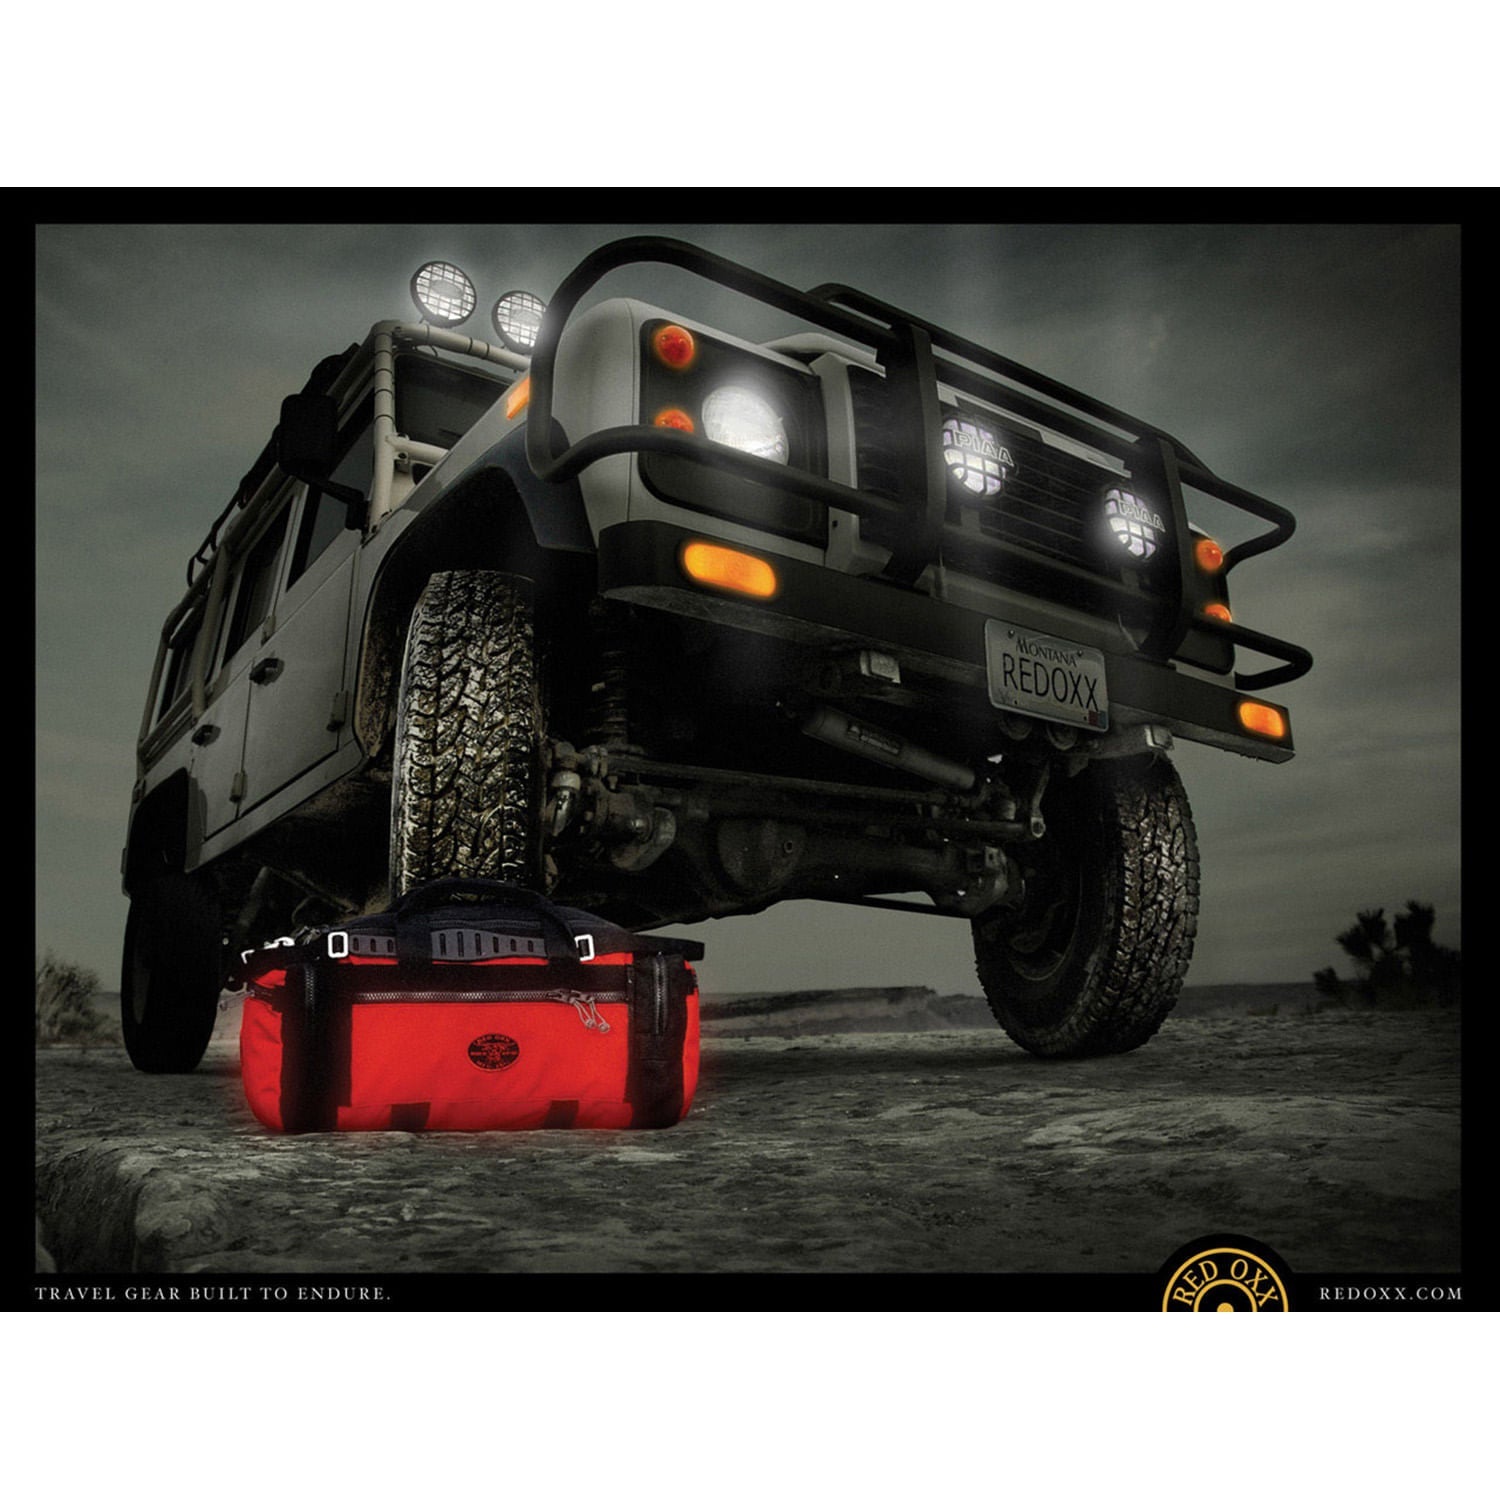 Land Rover Defender 110 With Red Oxx travel gear built to endure. 